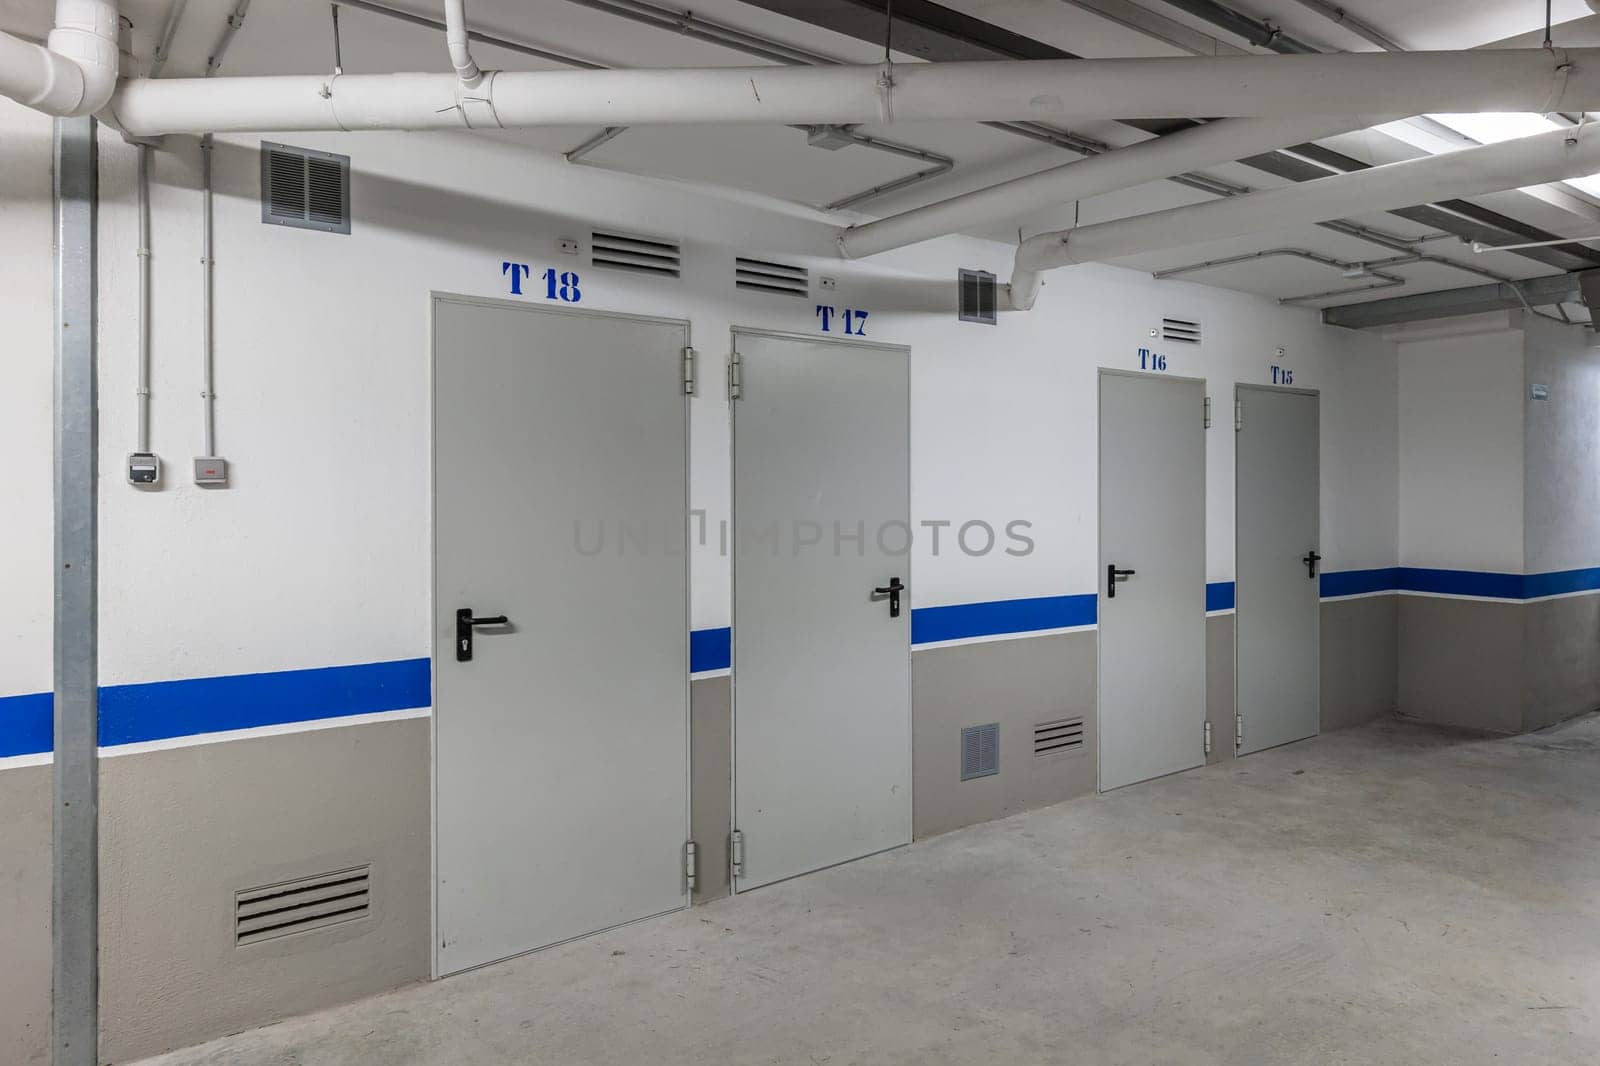 Modern storage facility with numbered white storage doors and blue stripes by apavlin